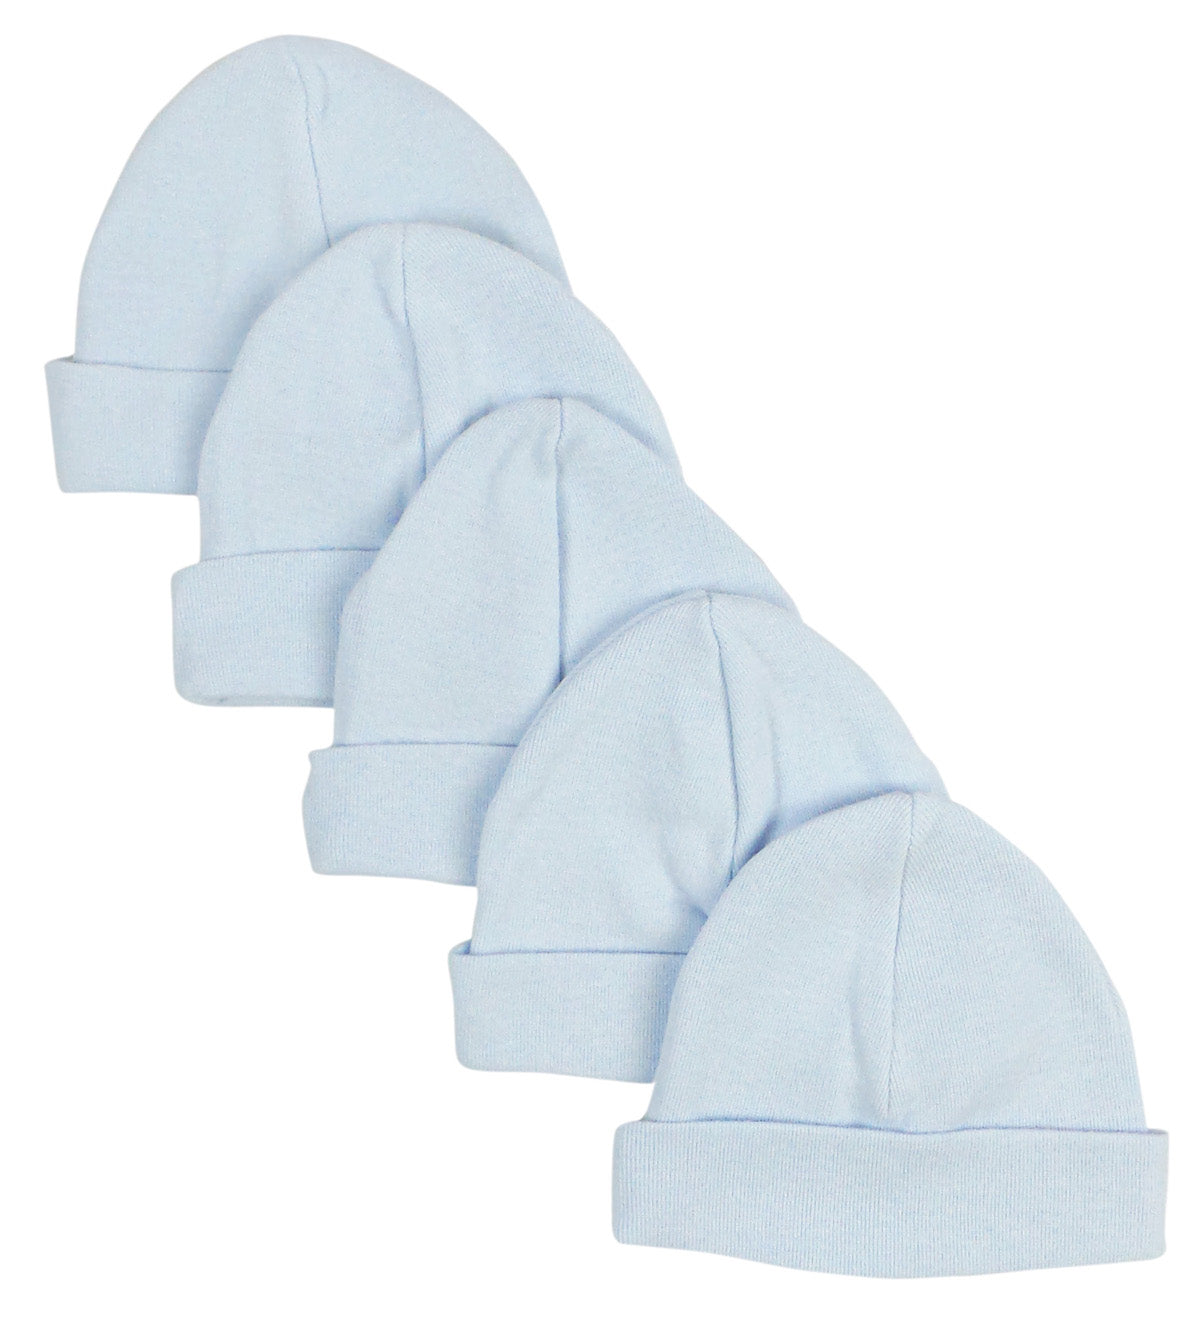 Blue Baby Cap (Pack of 5) 031-BLUE-5